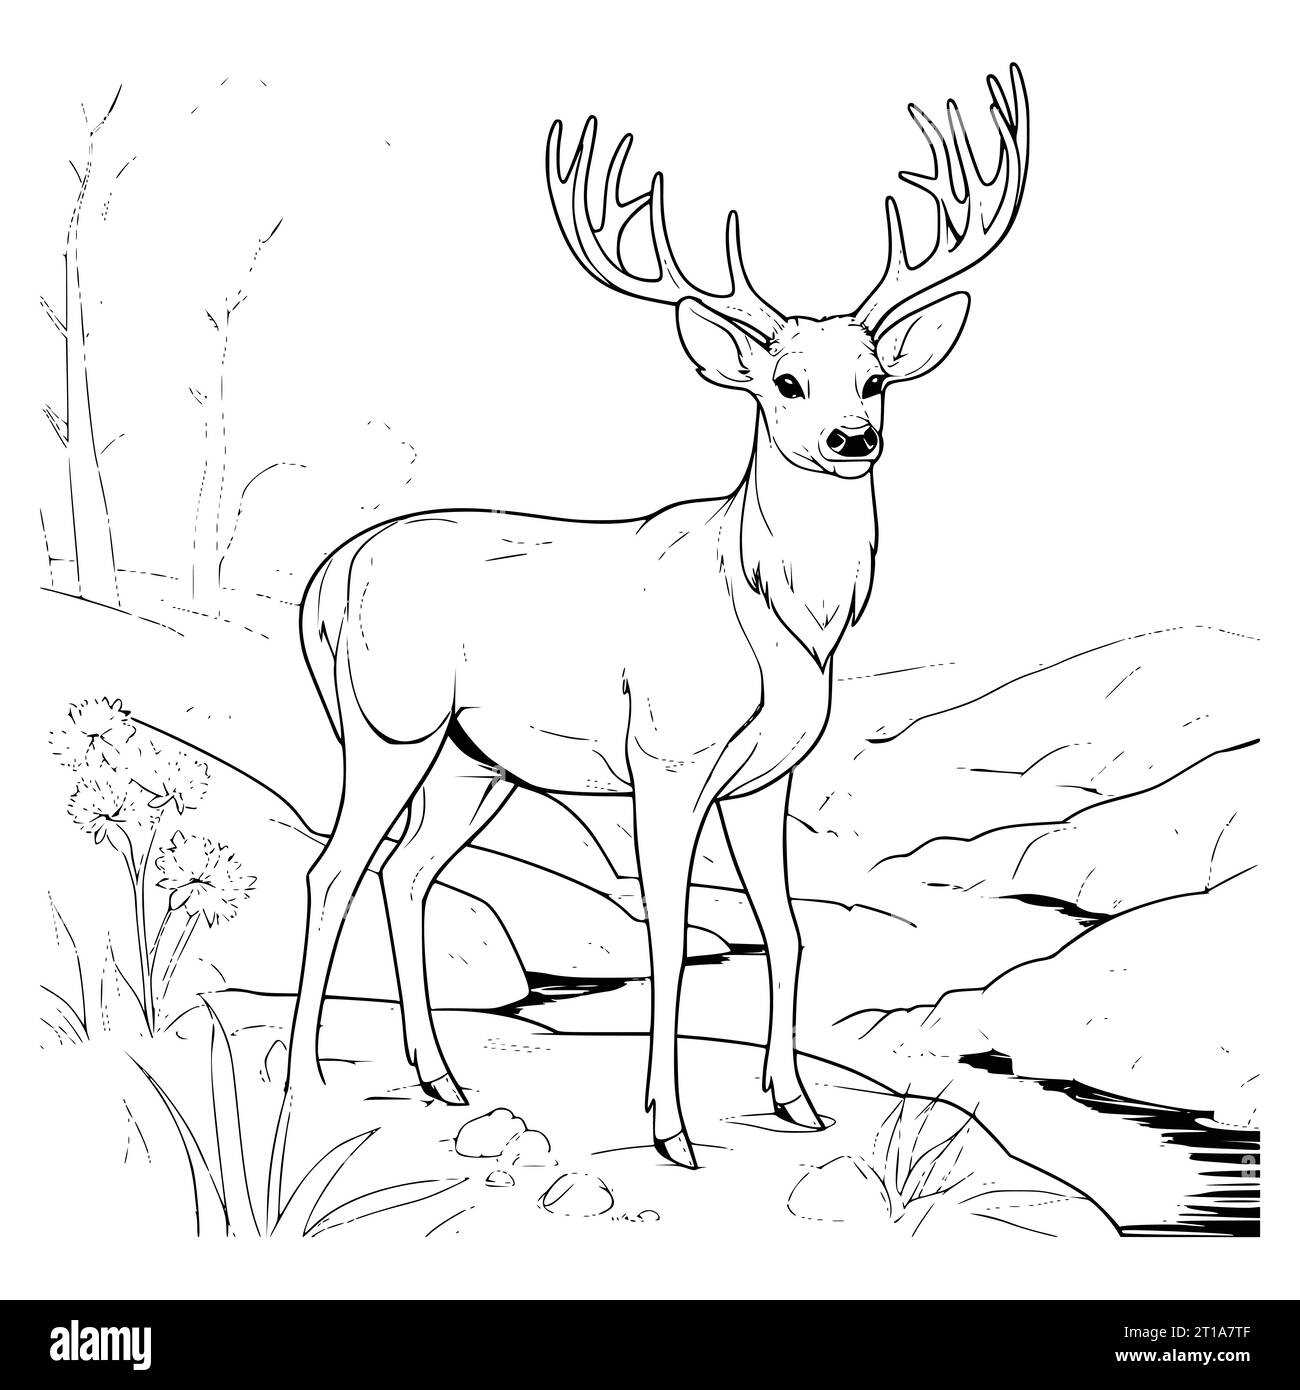 Big Deer on the River Bank Coloring Page Drawing for Kids Illustrazione Vettoriale